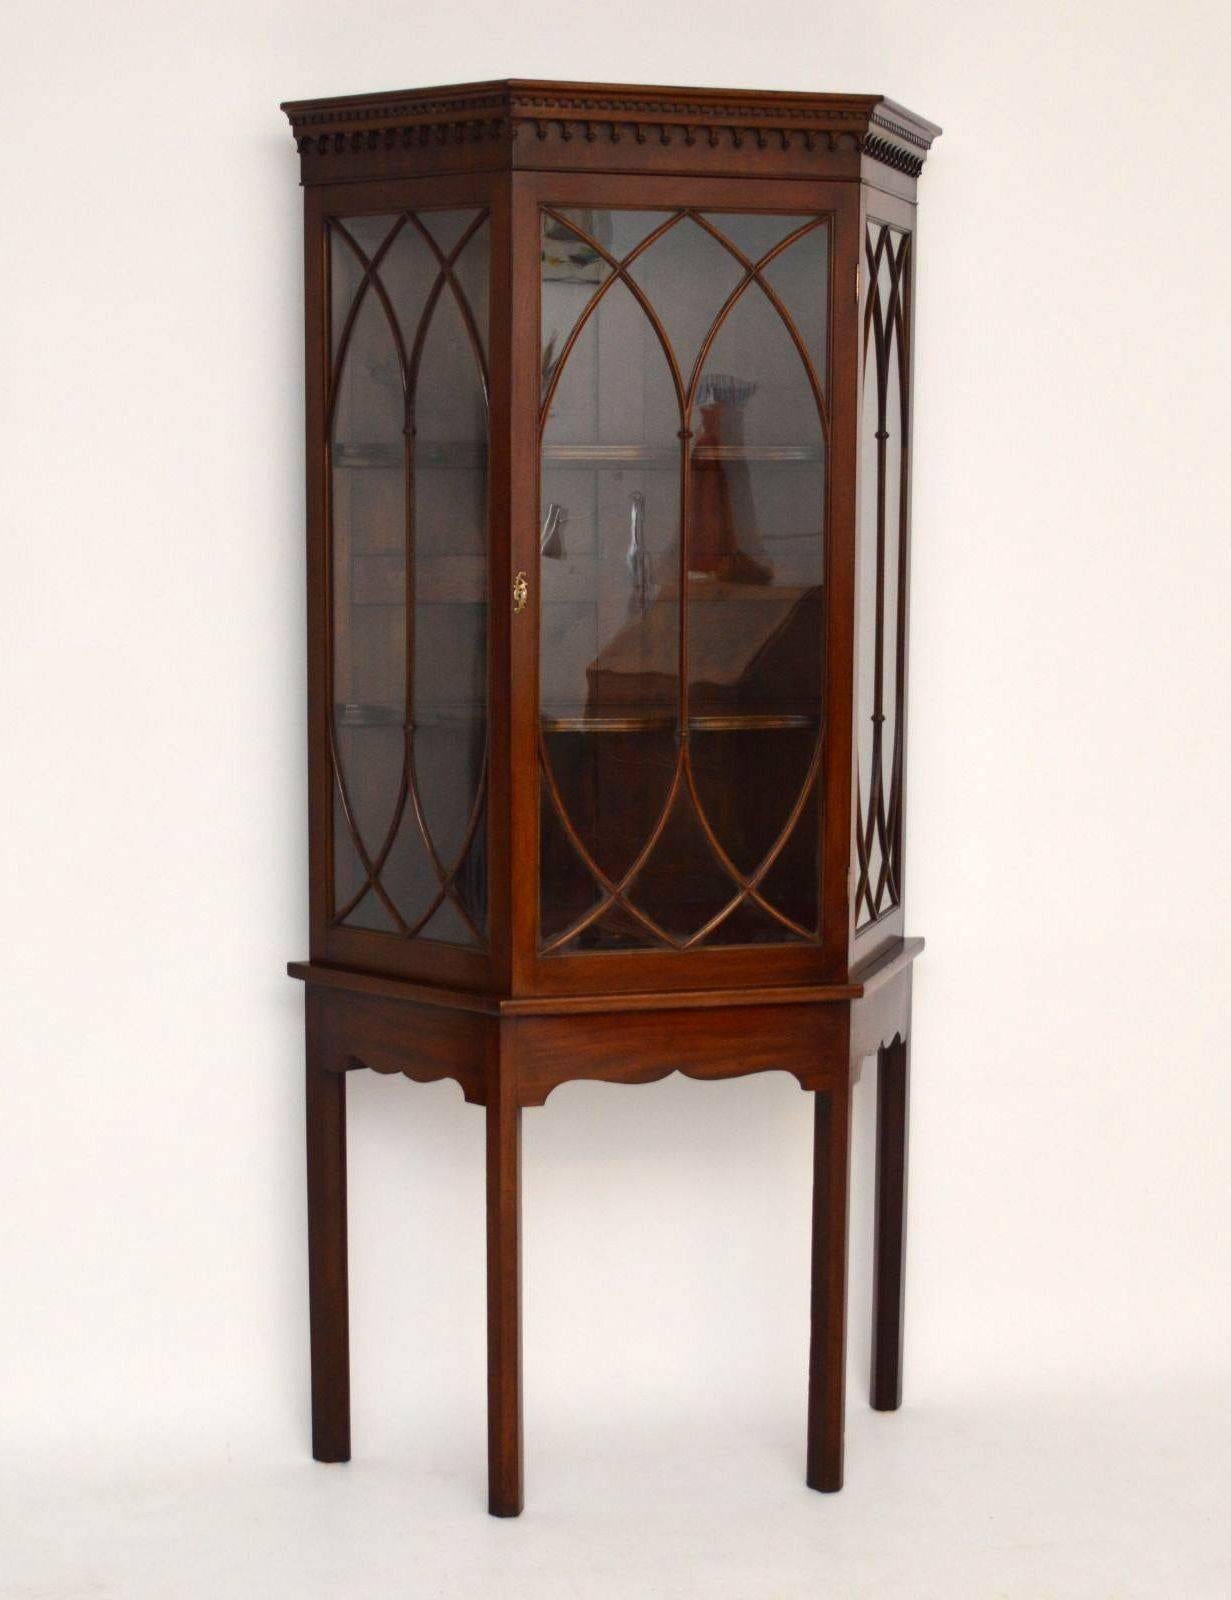 Impressive antique mahogany display cabinet in good original condition, with original colour and patina. The top cornice has a dental frieze with tear drop mouldings below. The astral glazing is of Gothic design and the shelves inside the cabinet